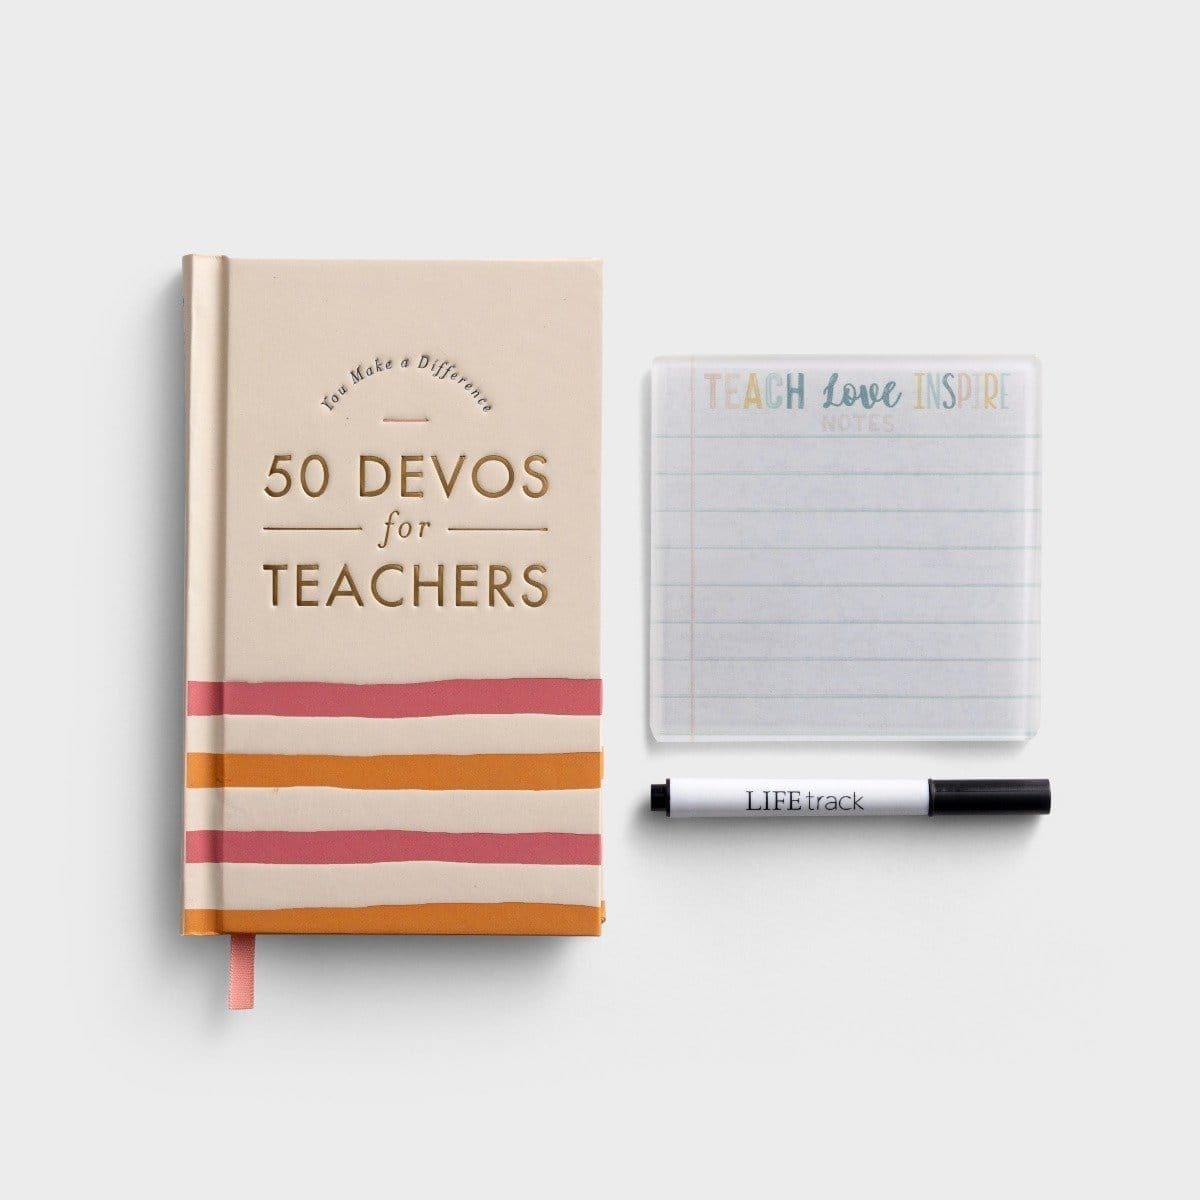 You Make a Difference - Inspirational Devo Gift Set for Teachers